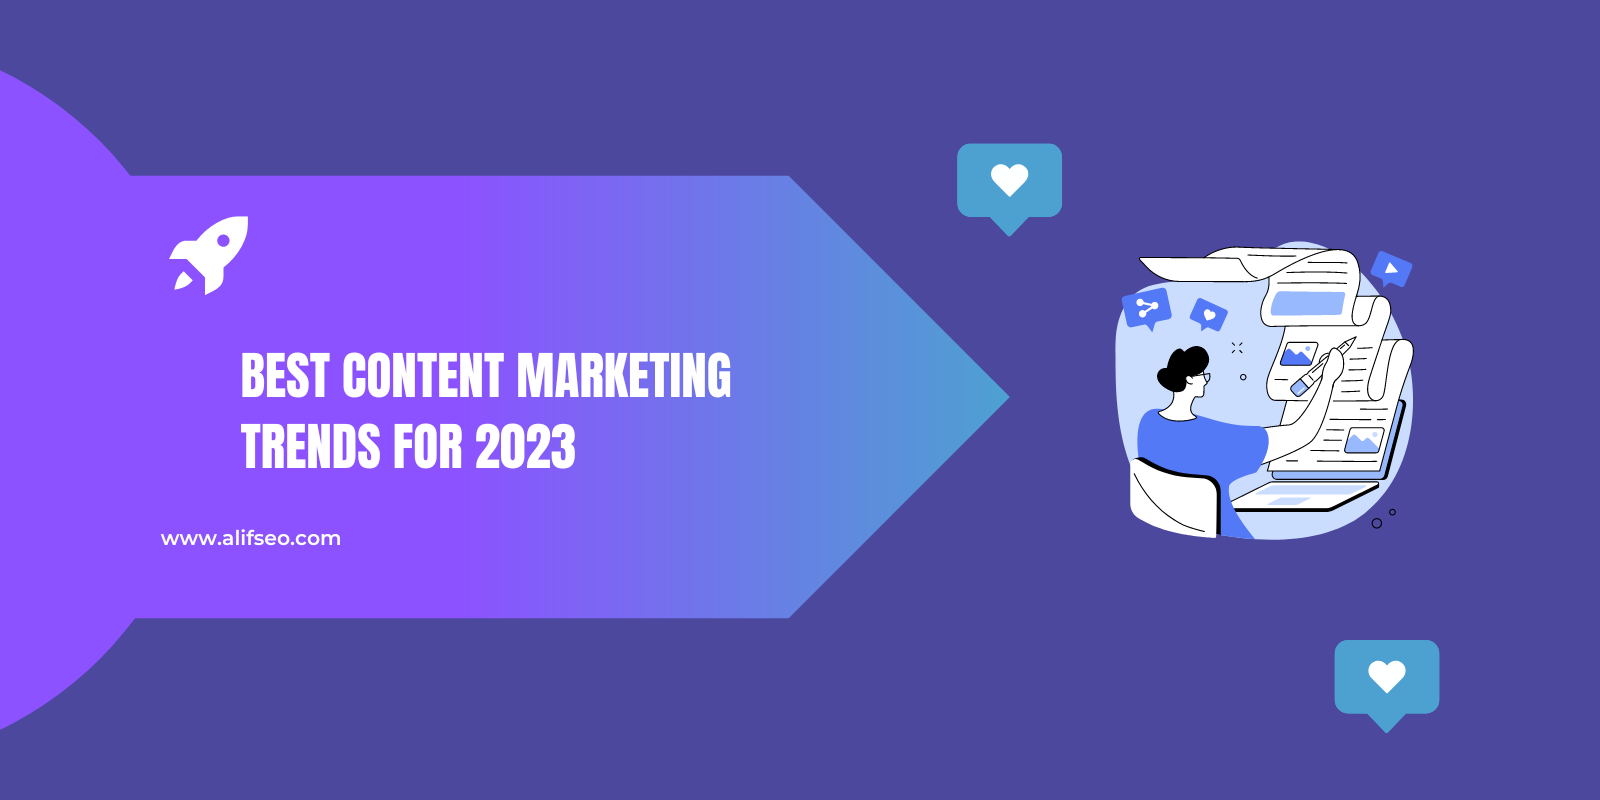 Best Content Marketing Trends for 2023